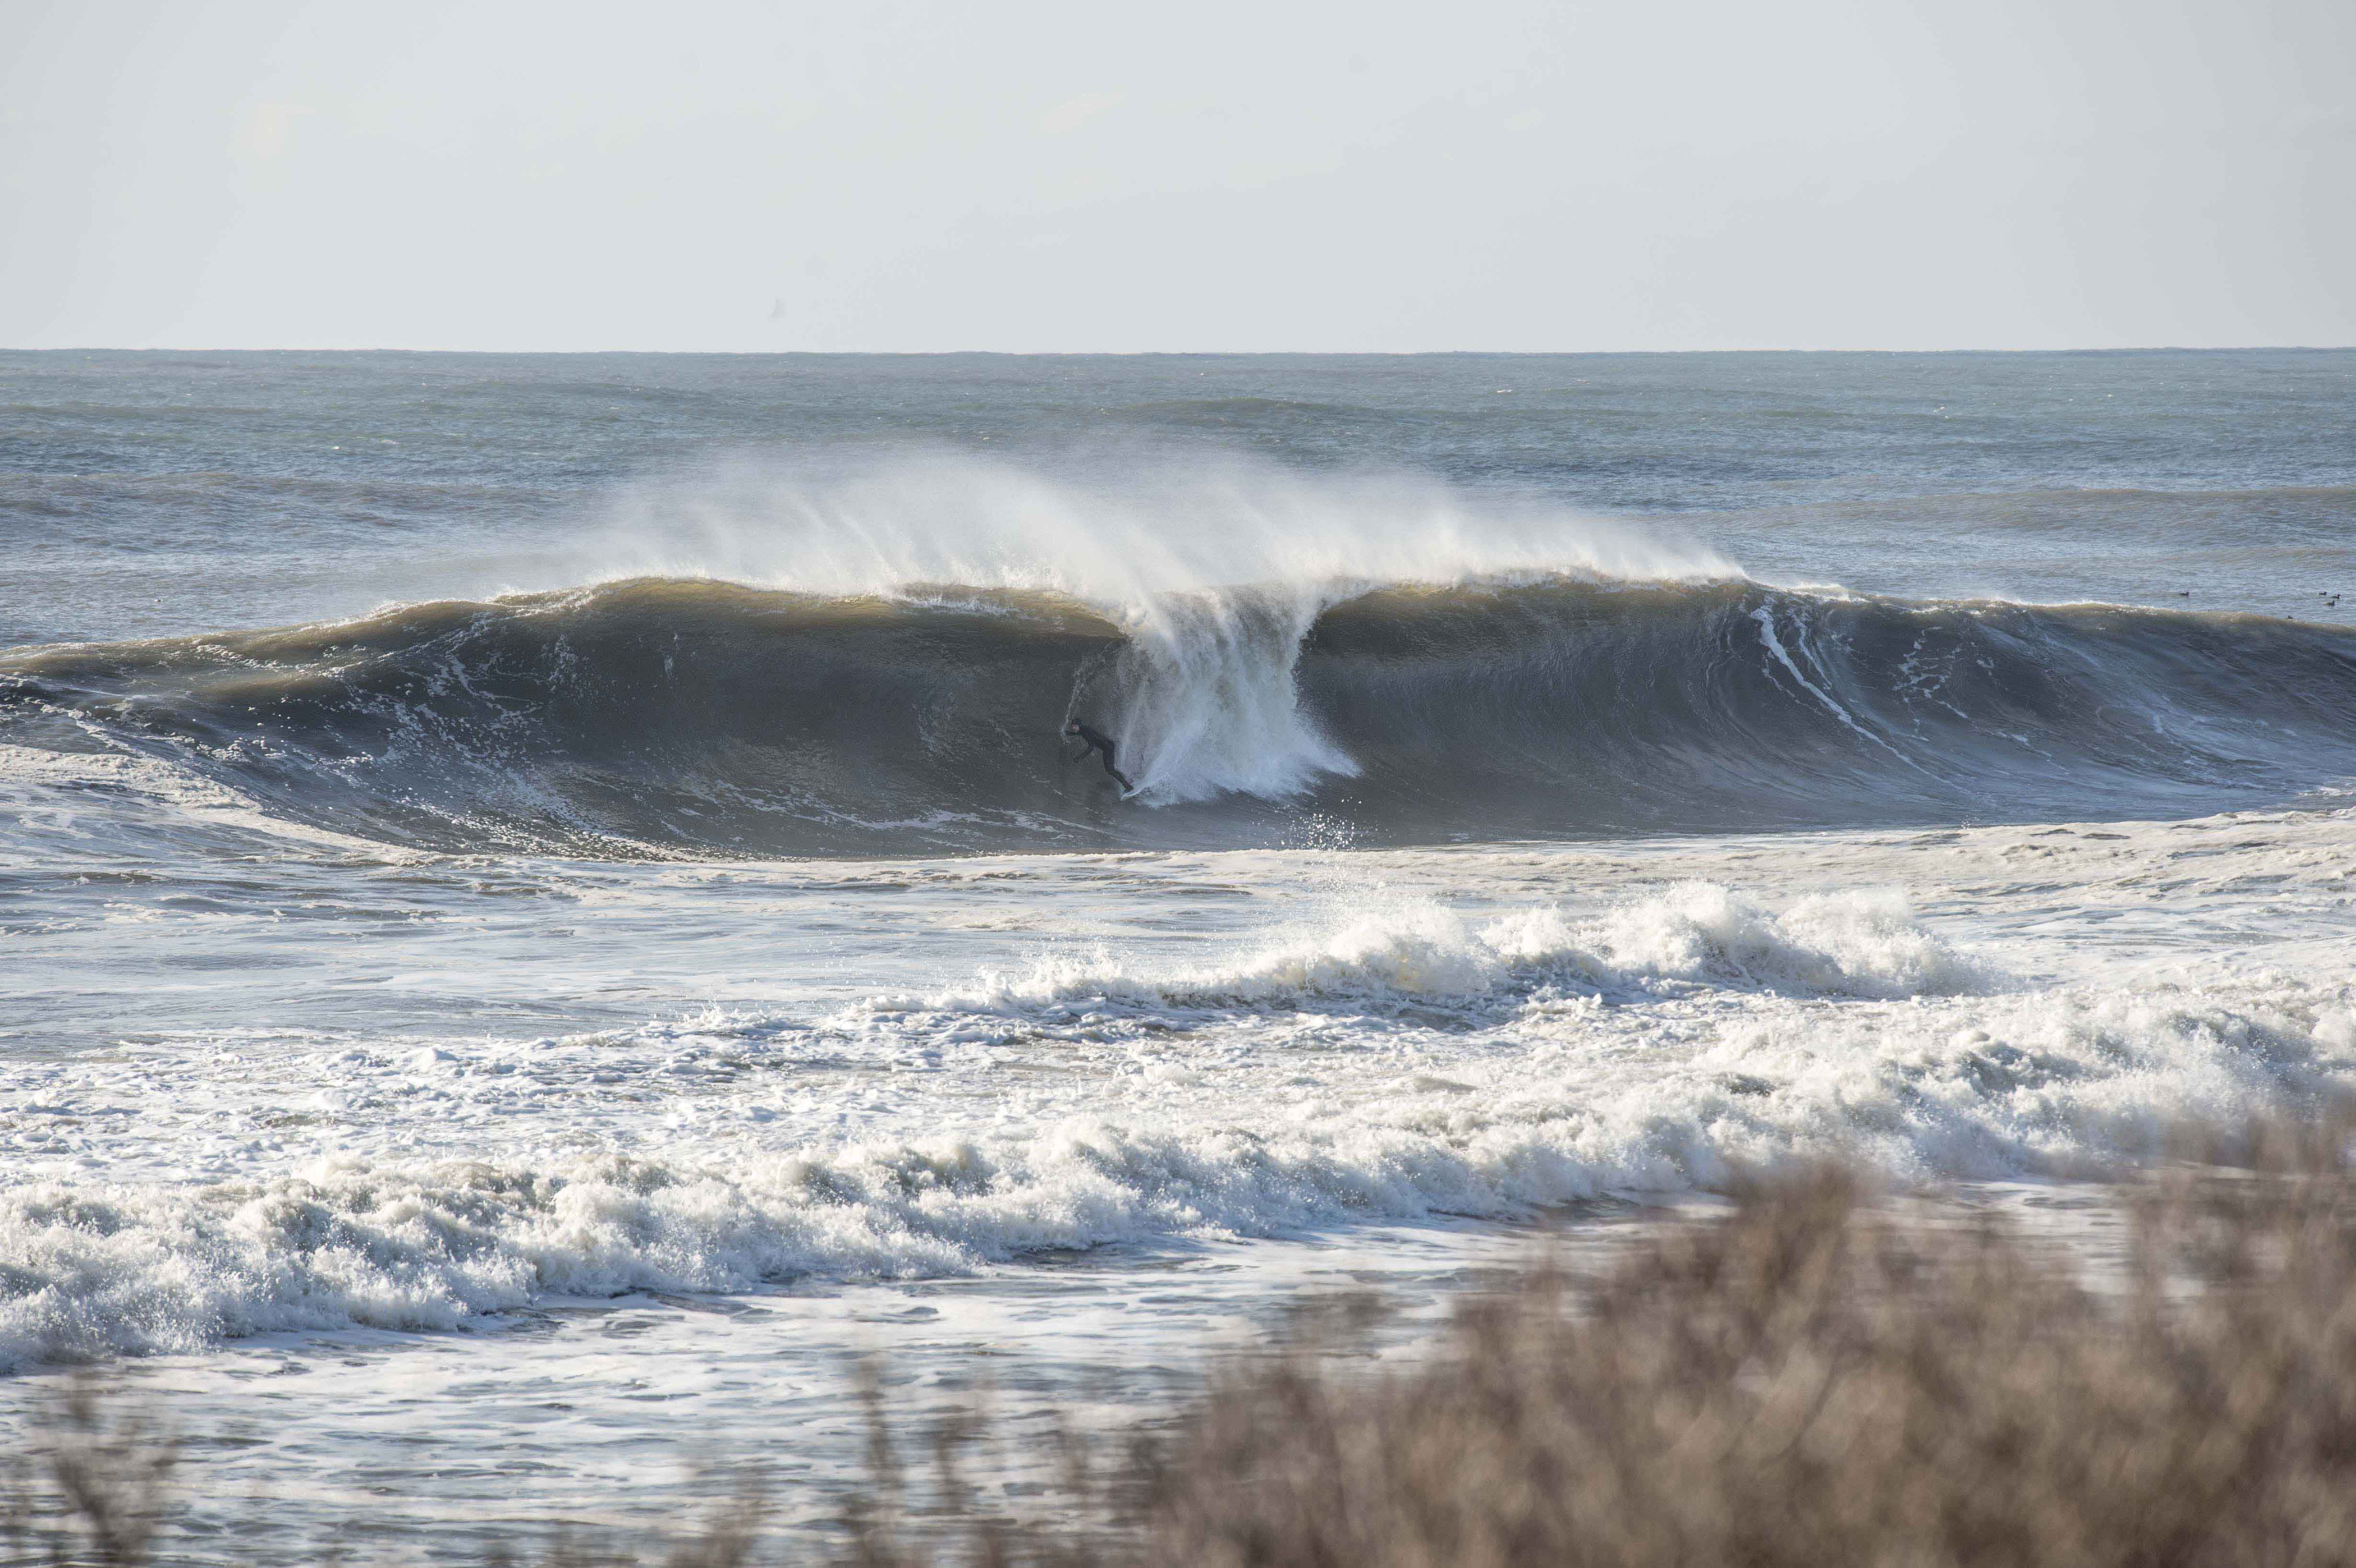 ​Wave of the Winter: Zack Dayton. Montauk doing its best impression of Backdoor/Pipeline. This wave was NUTS. There was a crew checking this wave in no rush to paddle out. Zack shows up suited up, paddles out and spins on this one and makes the mental drop and barrel. 